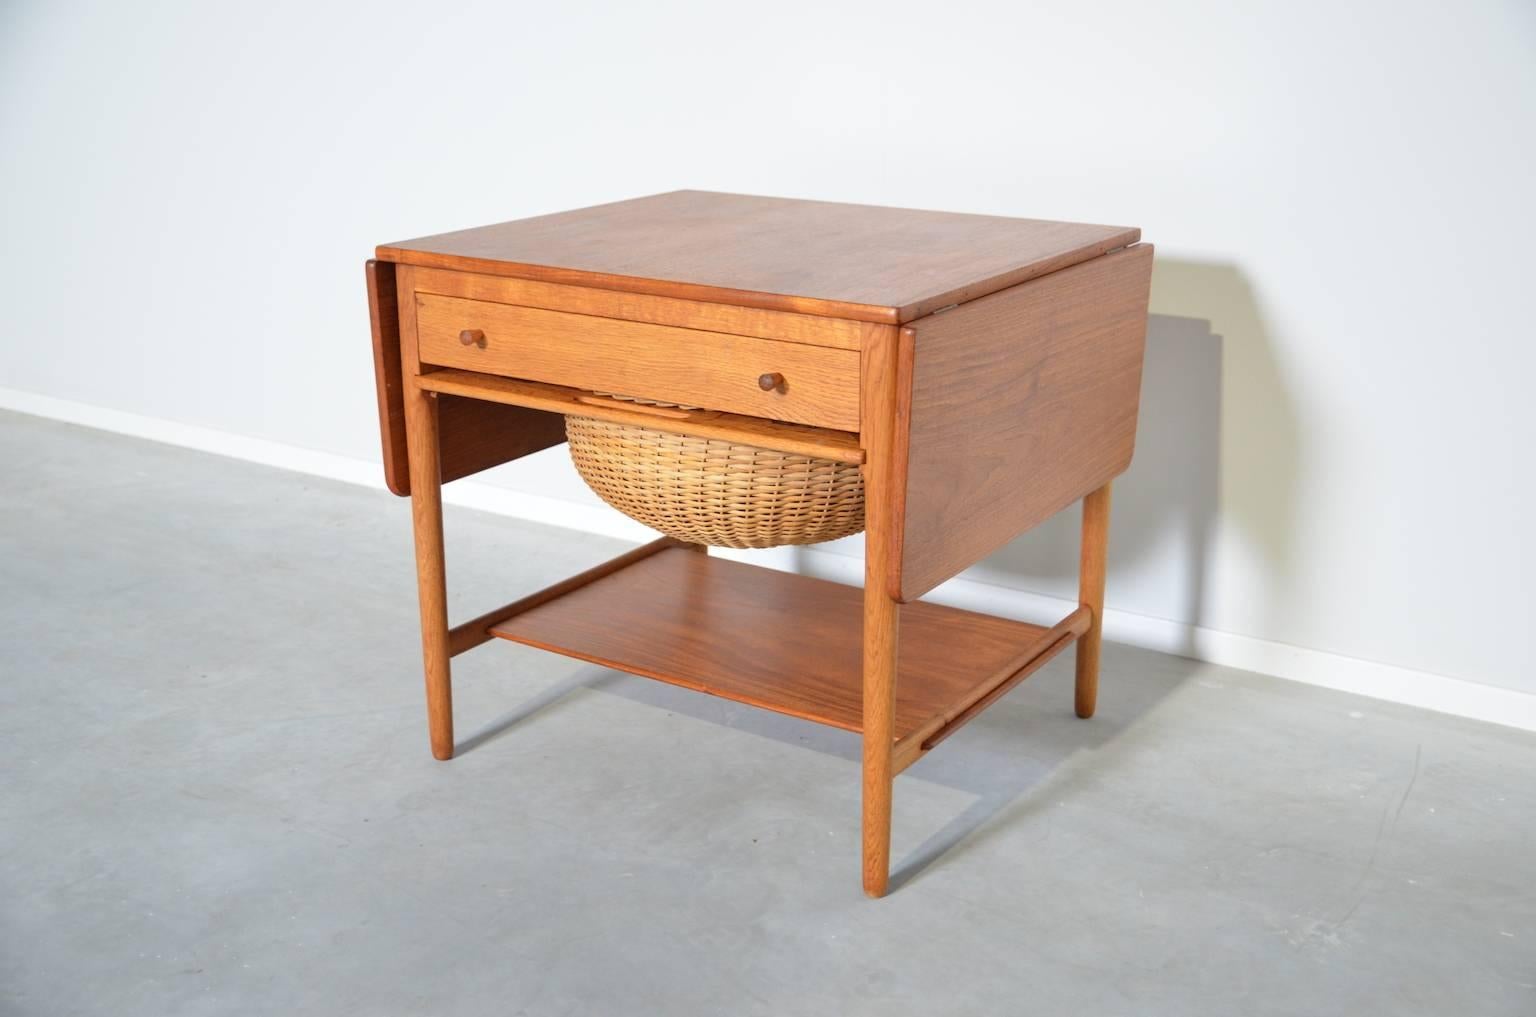 This sewing table (AT33) has a storage basket and a drawer with several compartments for storing yarn bobbins and other haberdashery. The table top can be extended by two drop-leafs, width 27 cm each.